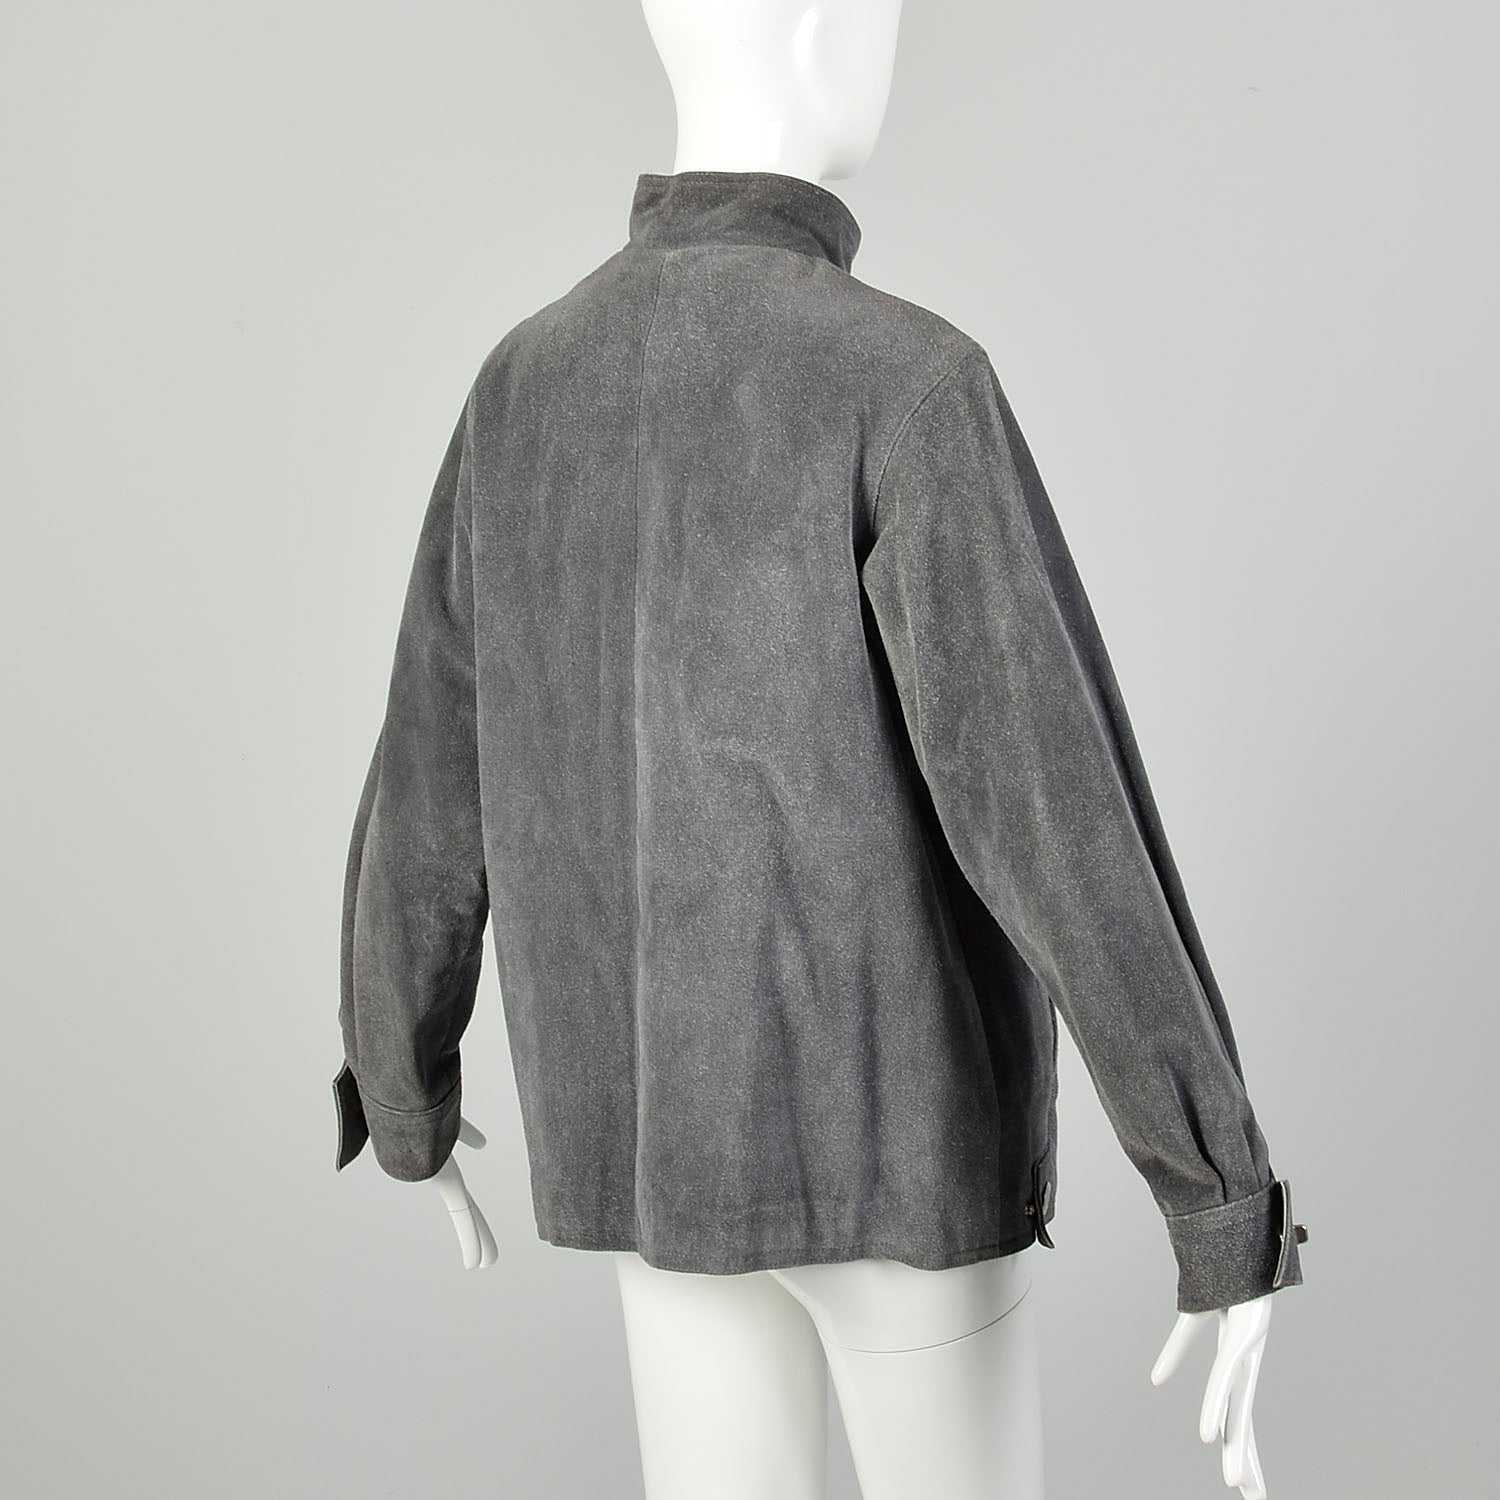 Medium 1970s Grey Suede Jacket With Faux Fur Lining